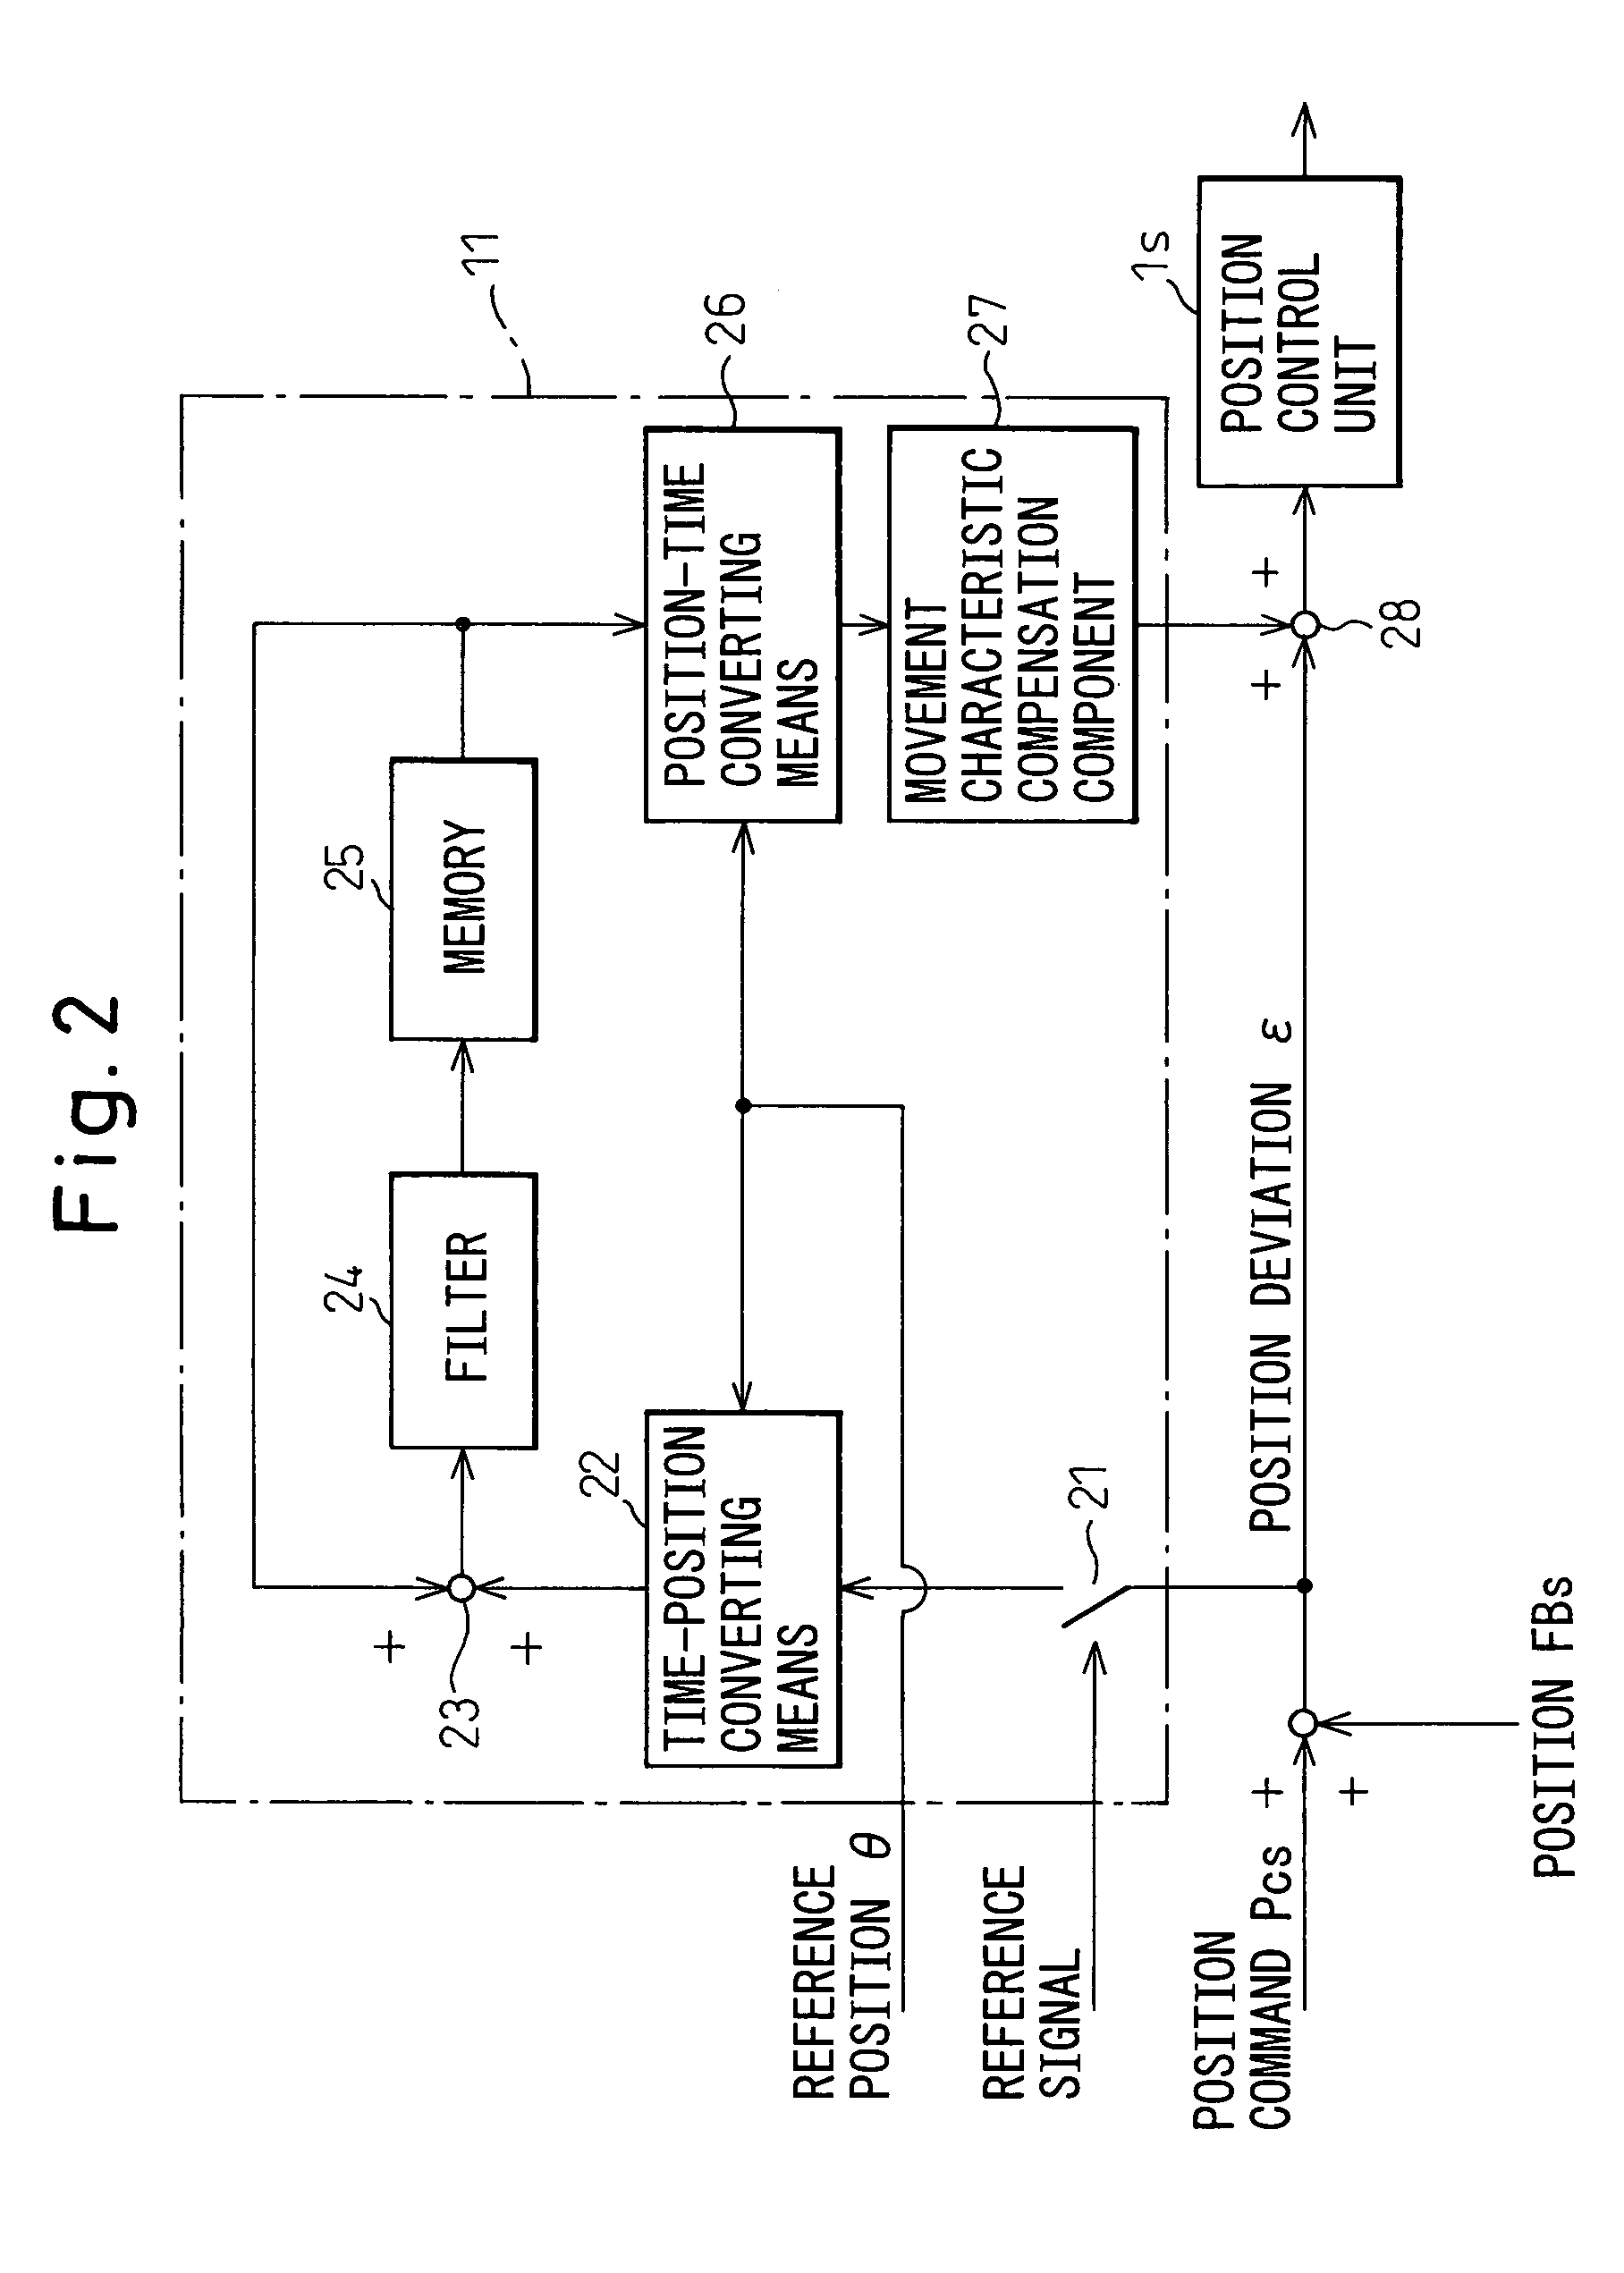 Threading/tapping control apparatus